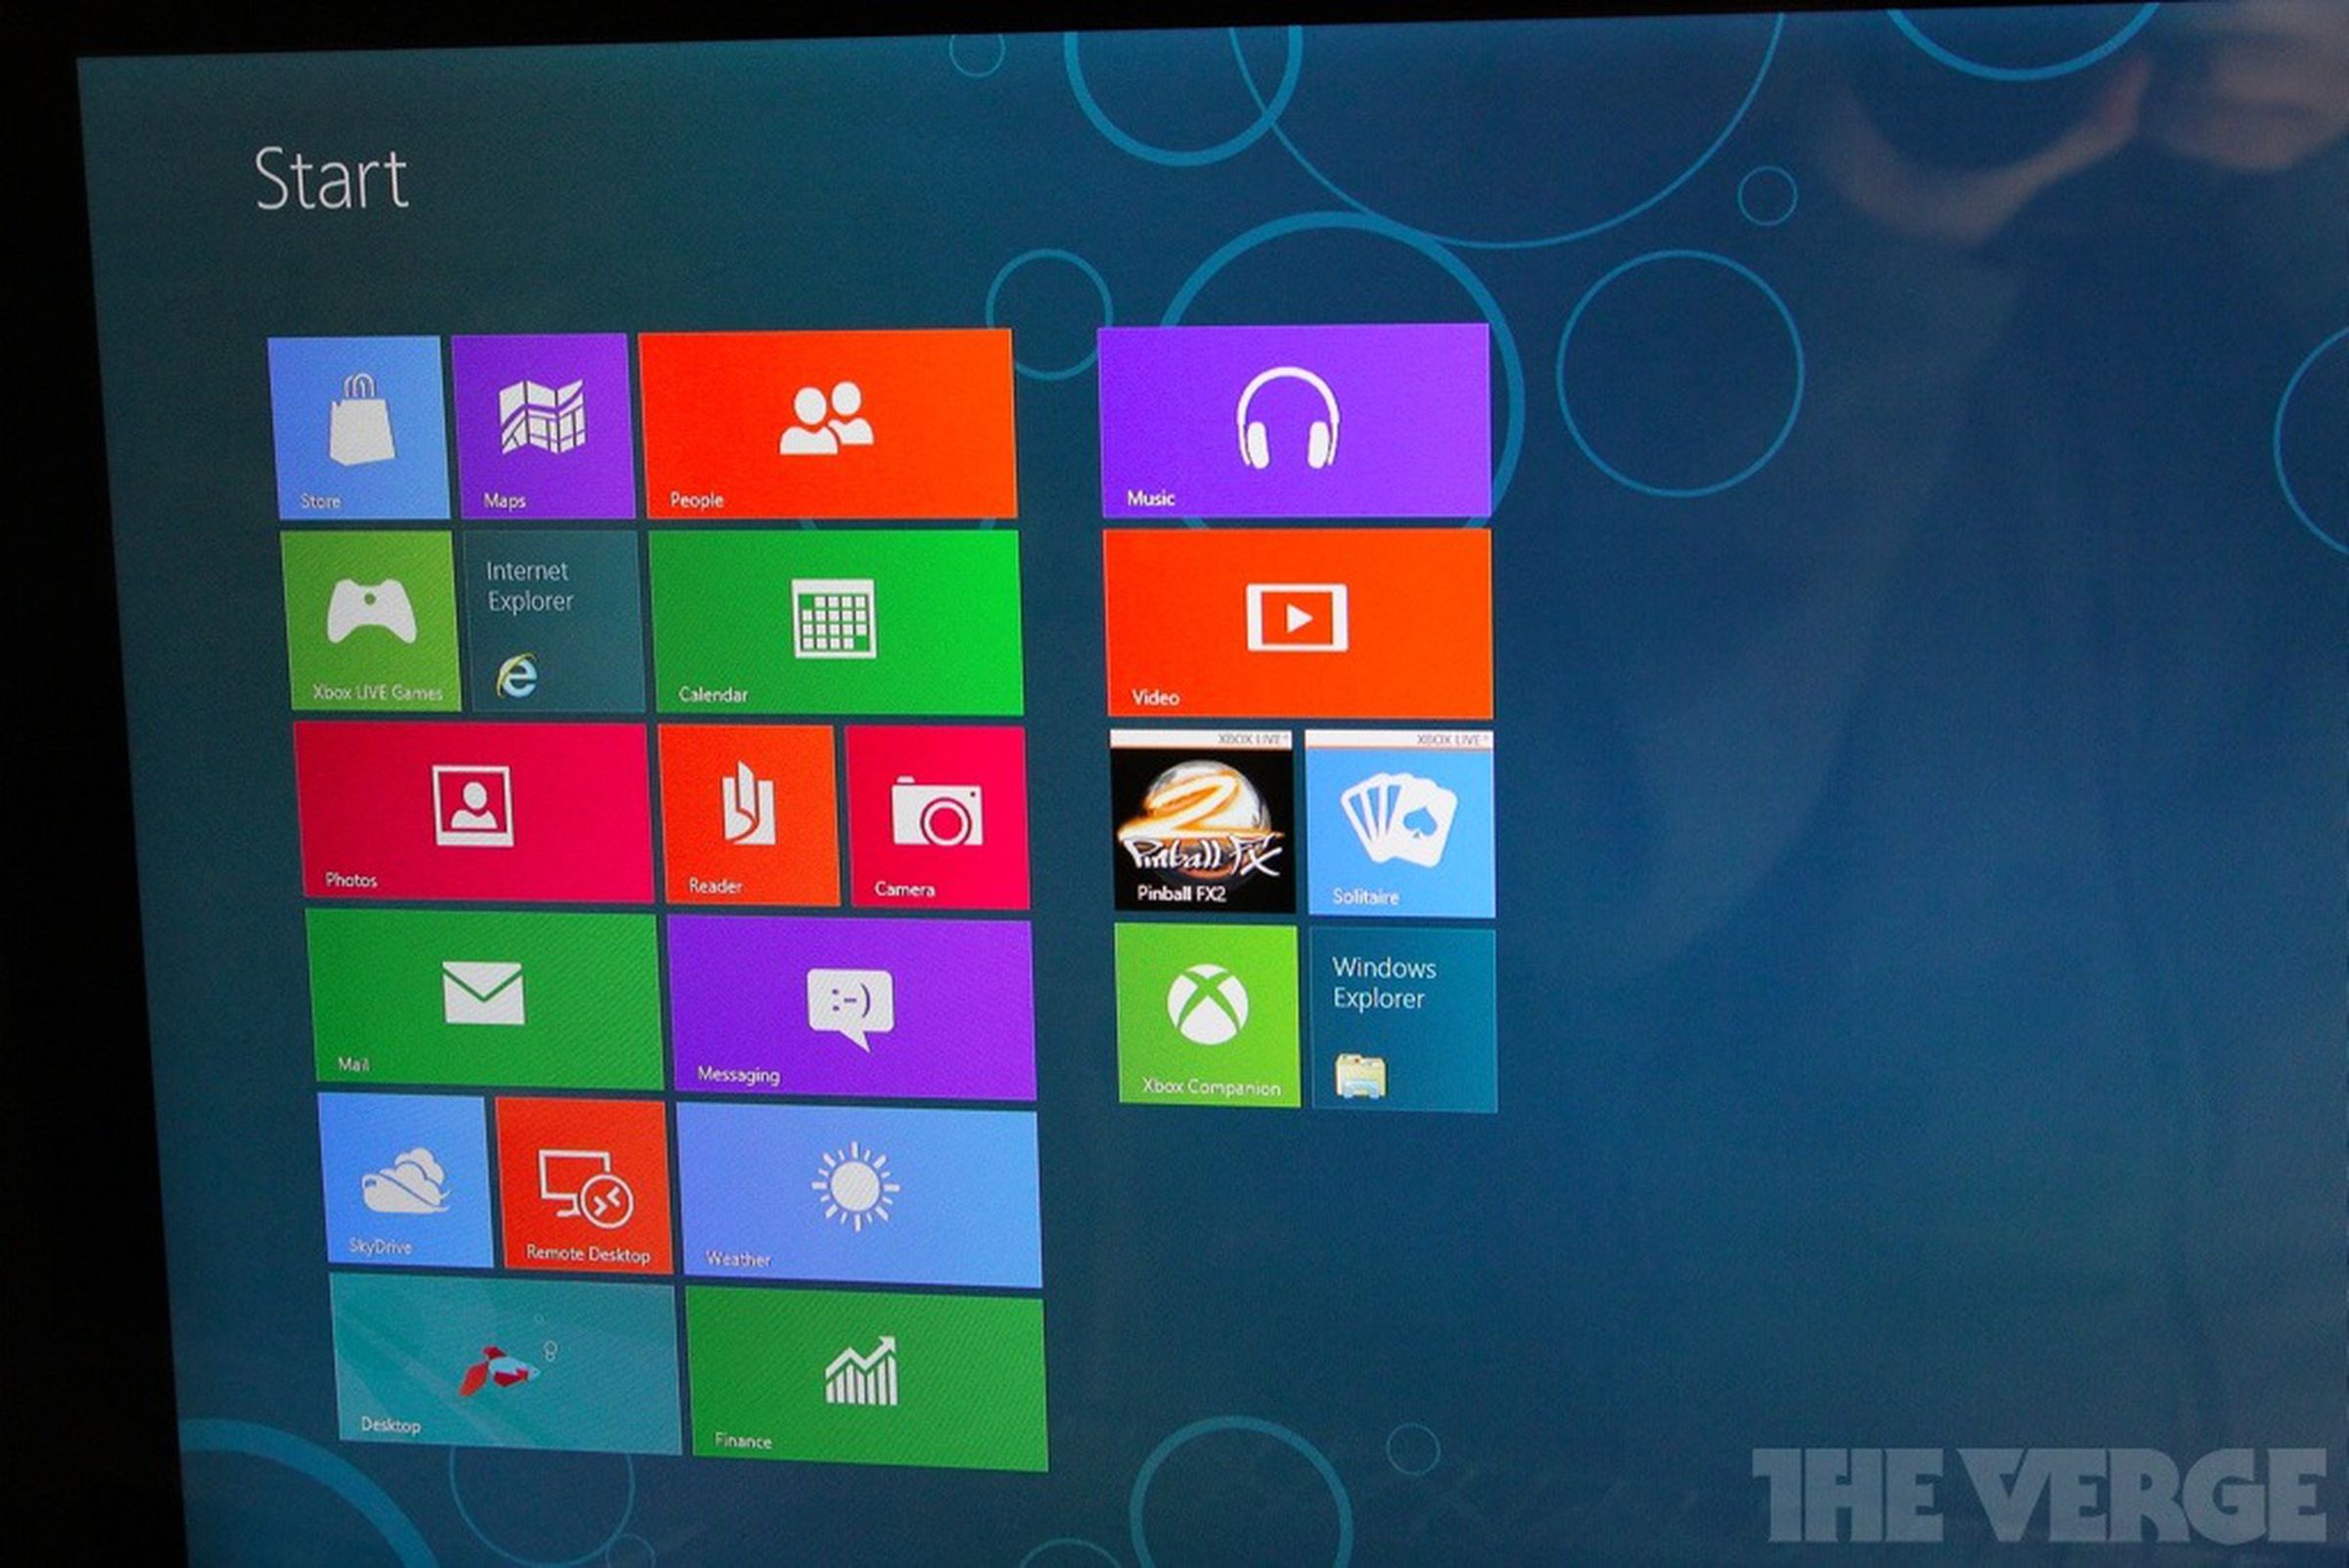 Windows 8 Consumer Preview install guide: from ISO to in-place upgrade (screenshots)